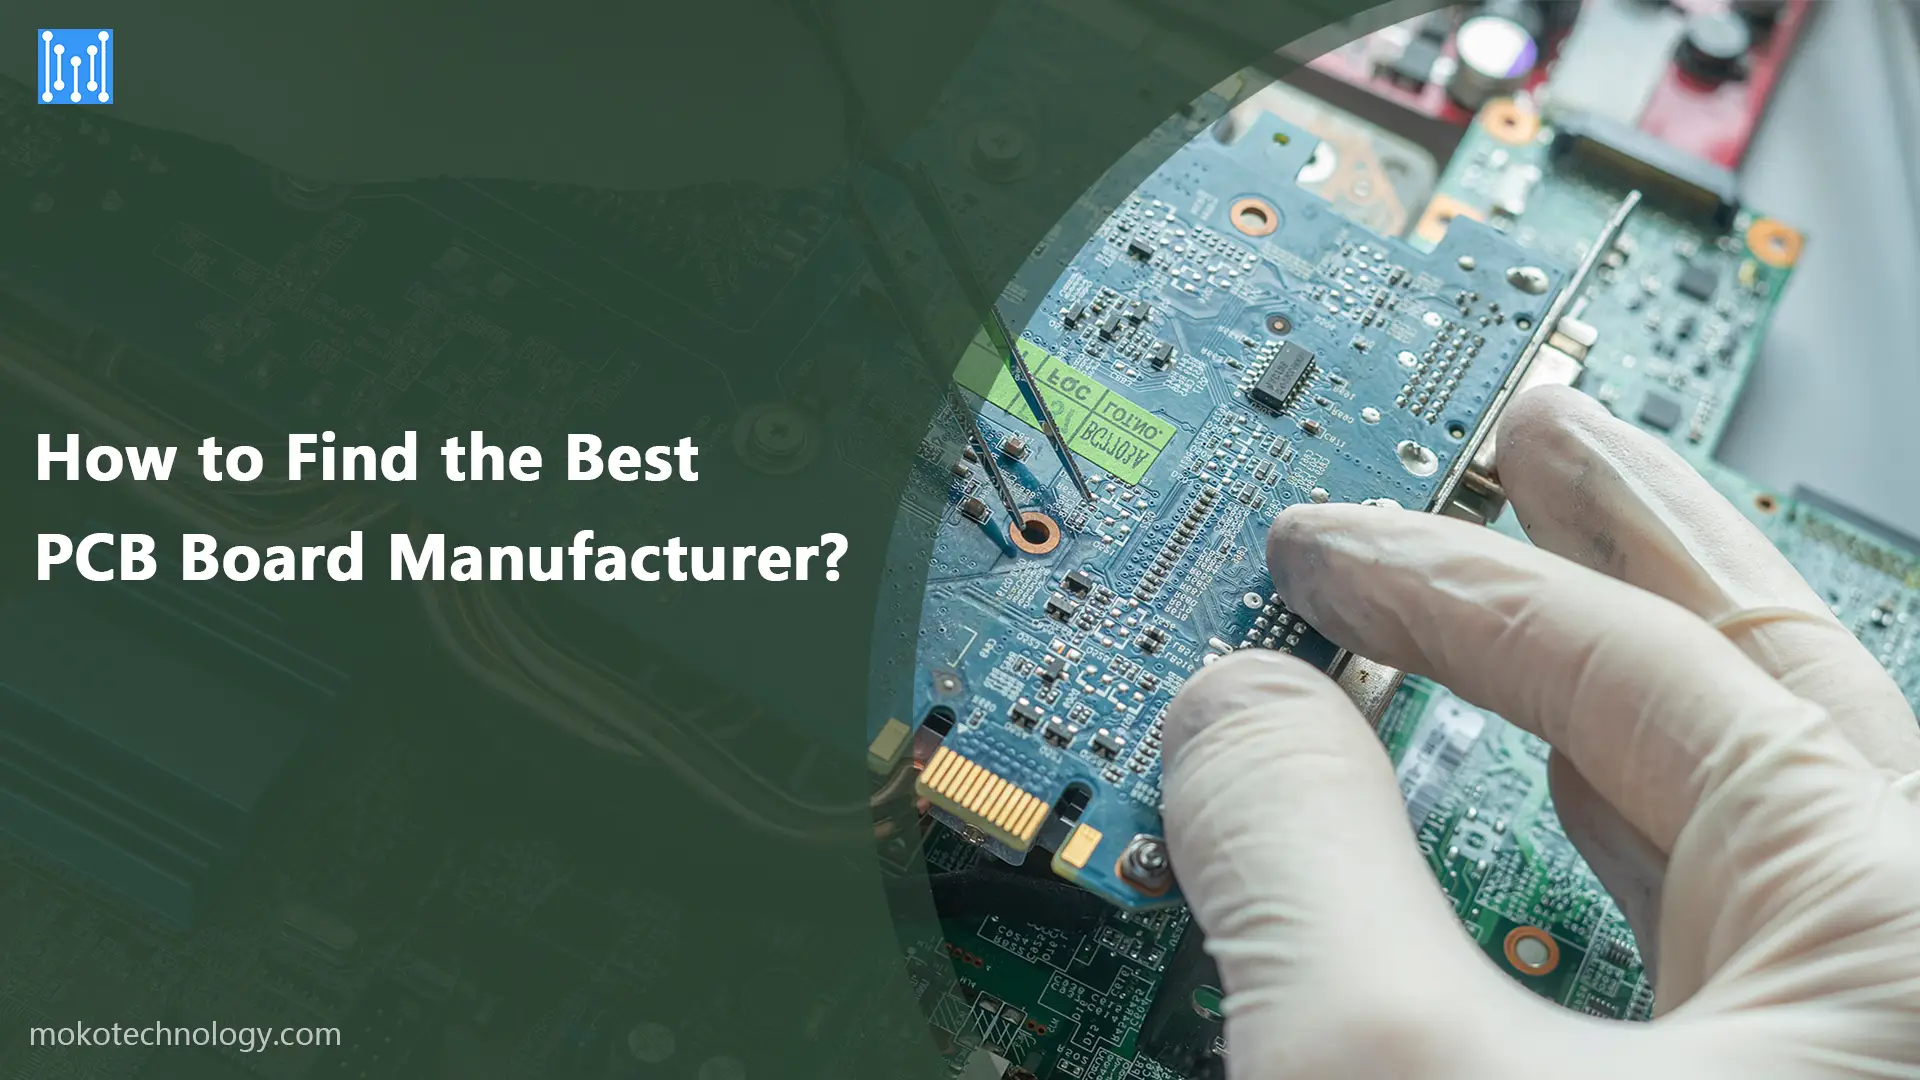 How to Find the Best PCB Board Manufacturer